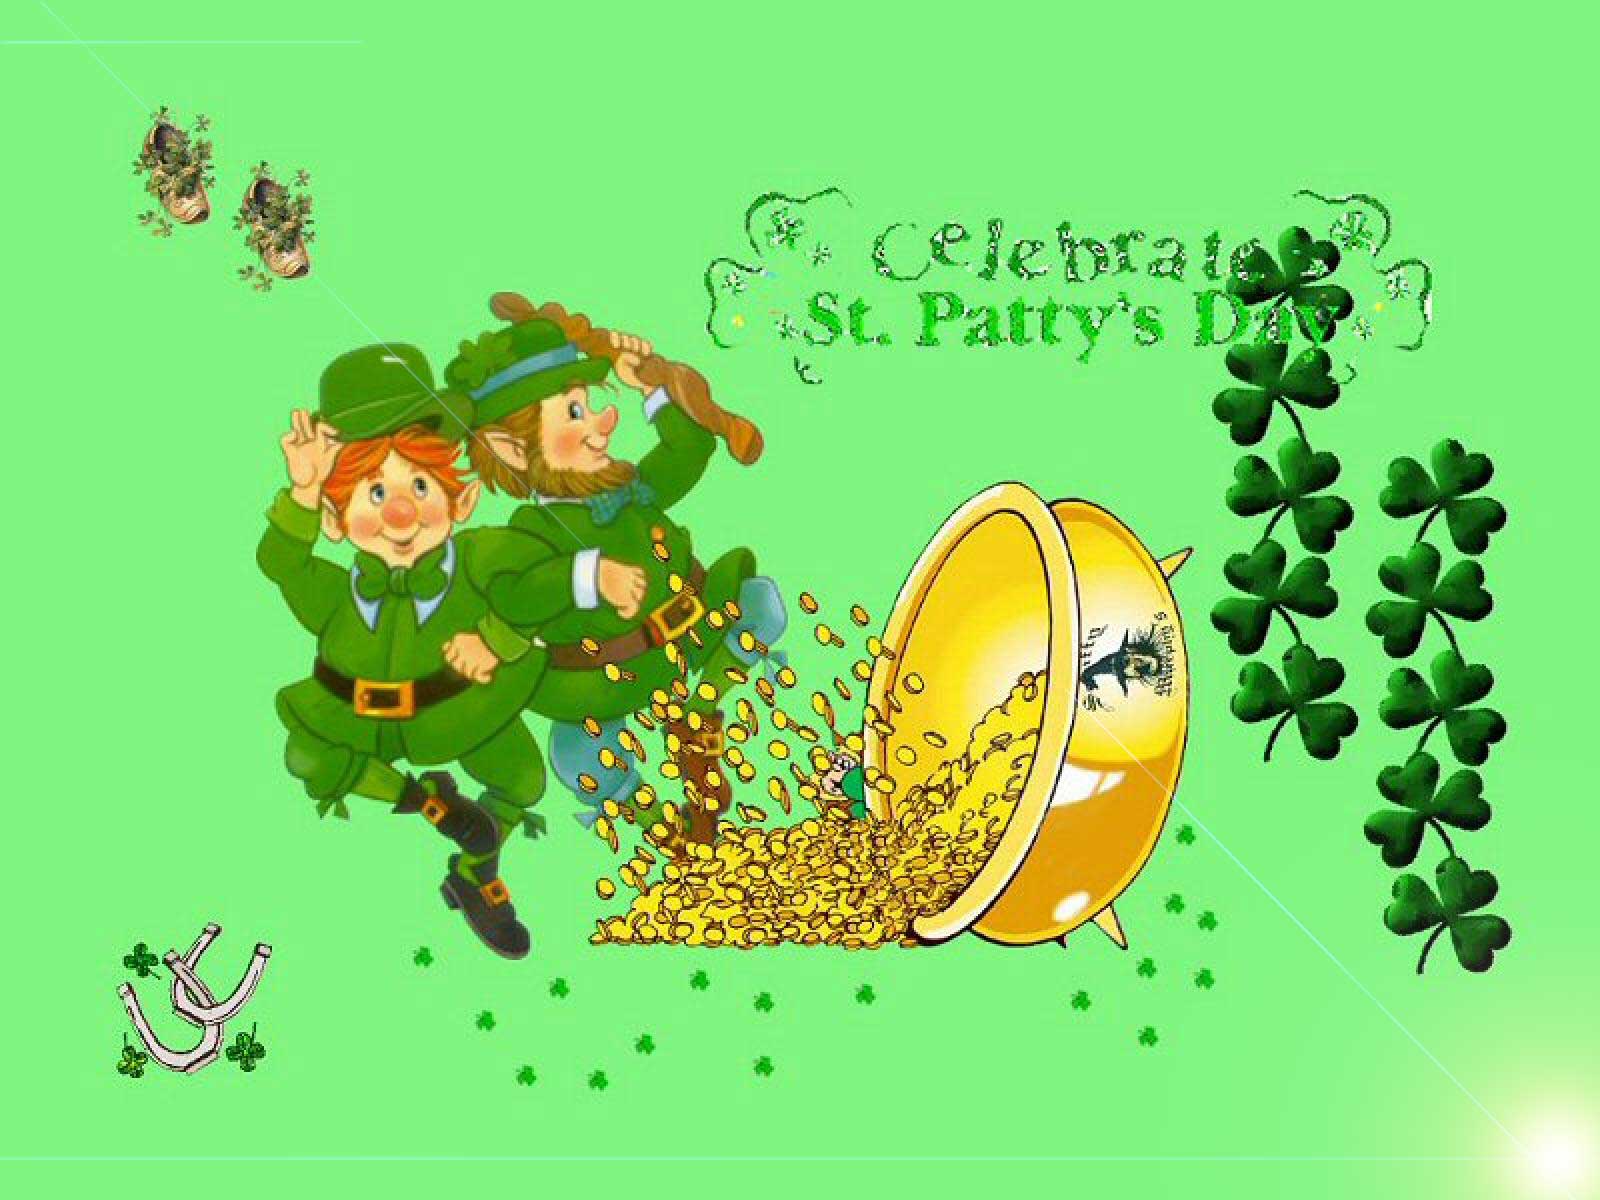 gallery St Patricks Day Greetings WallPapers Fun Gallery Images